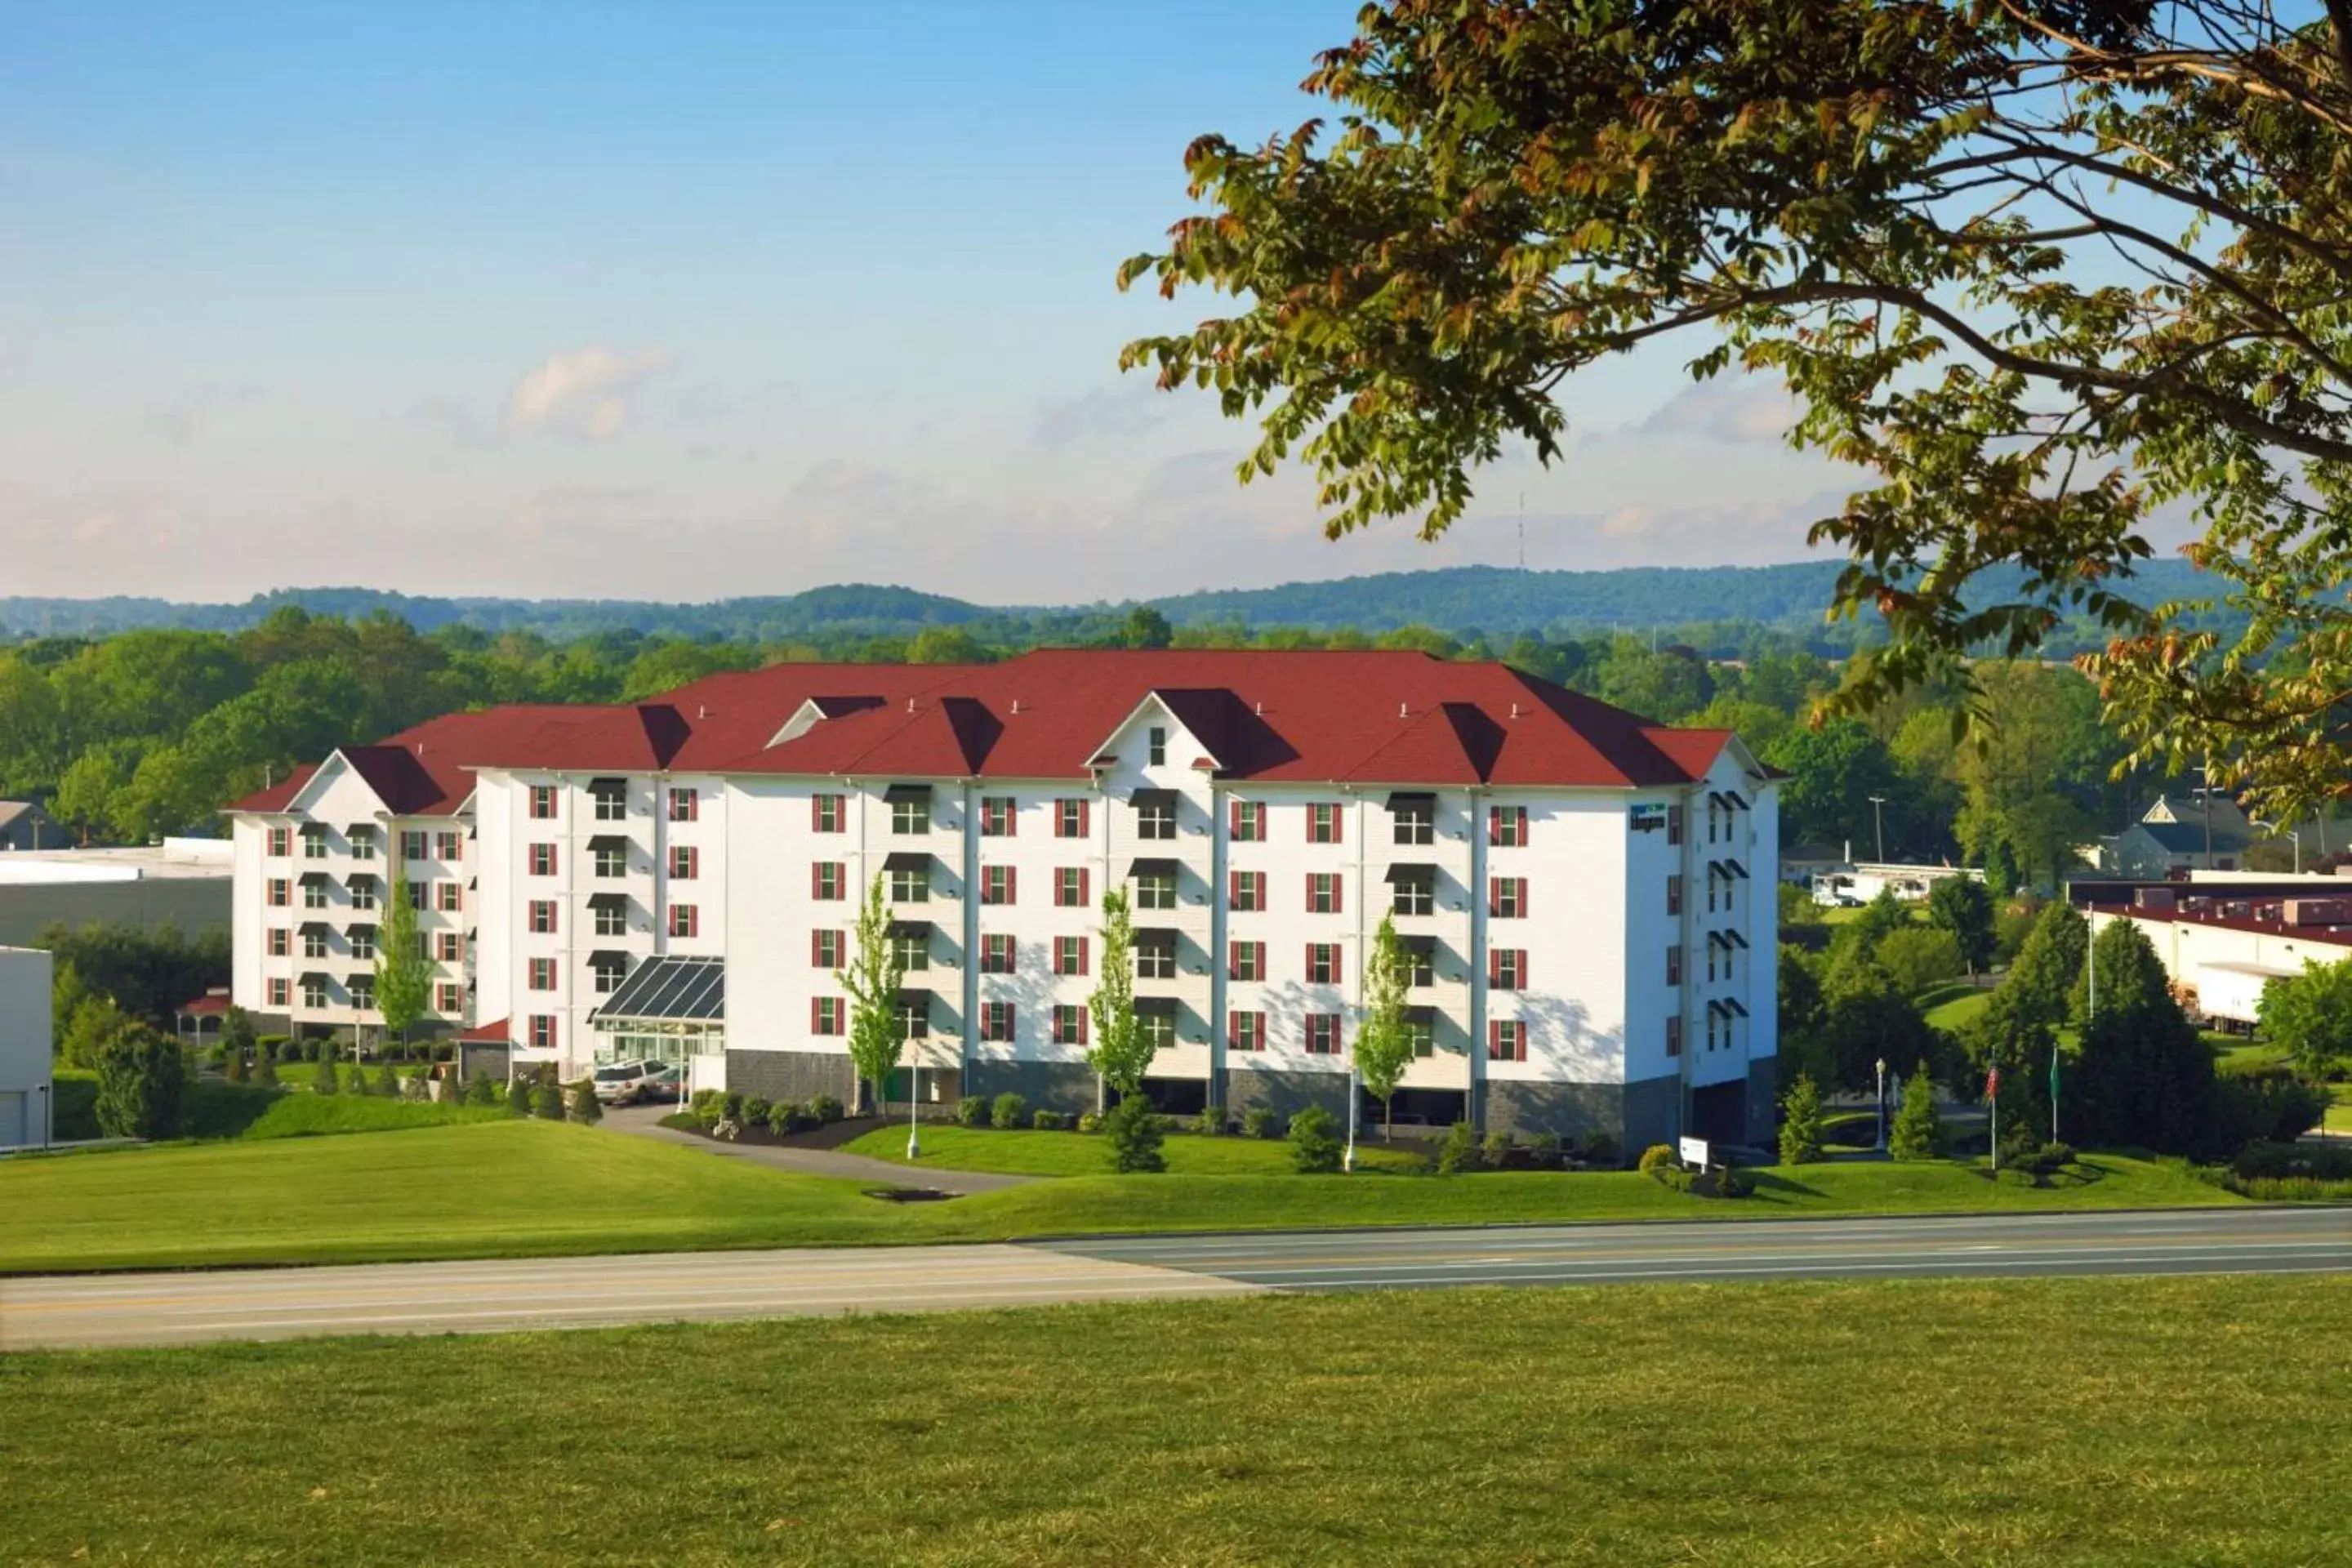 Property Building in Bluegreen Vacations Suites at Hershey